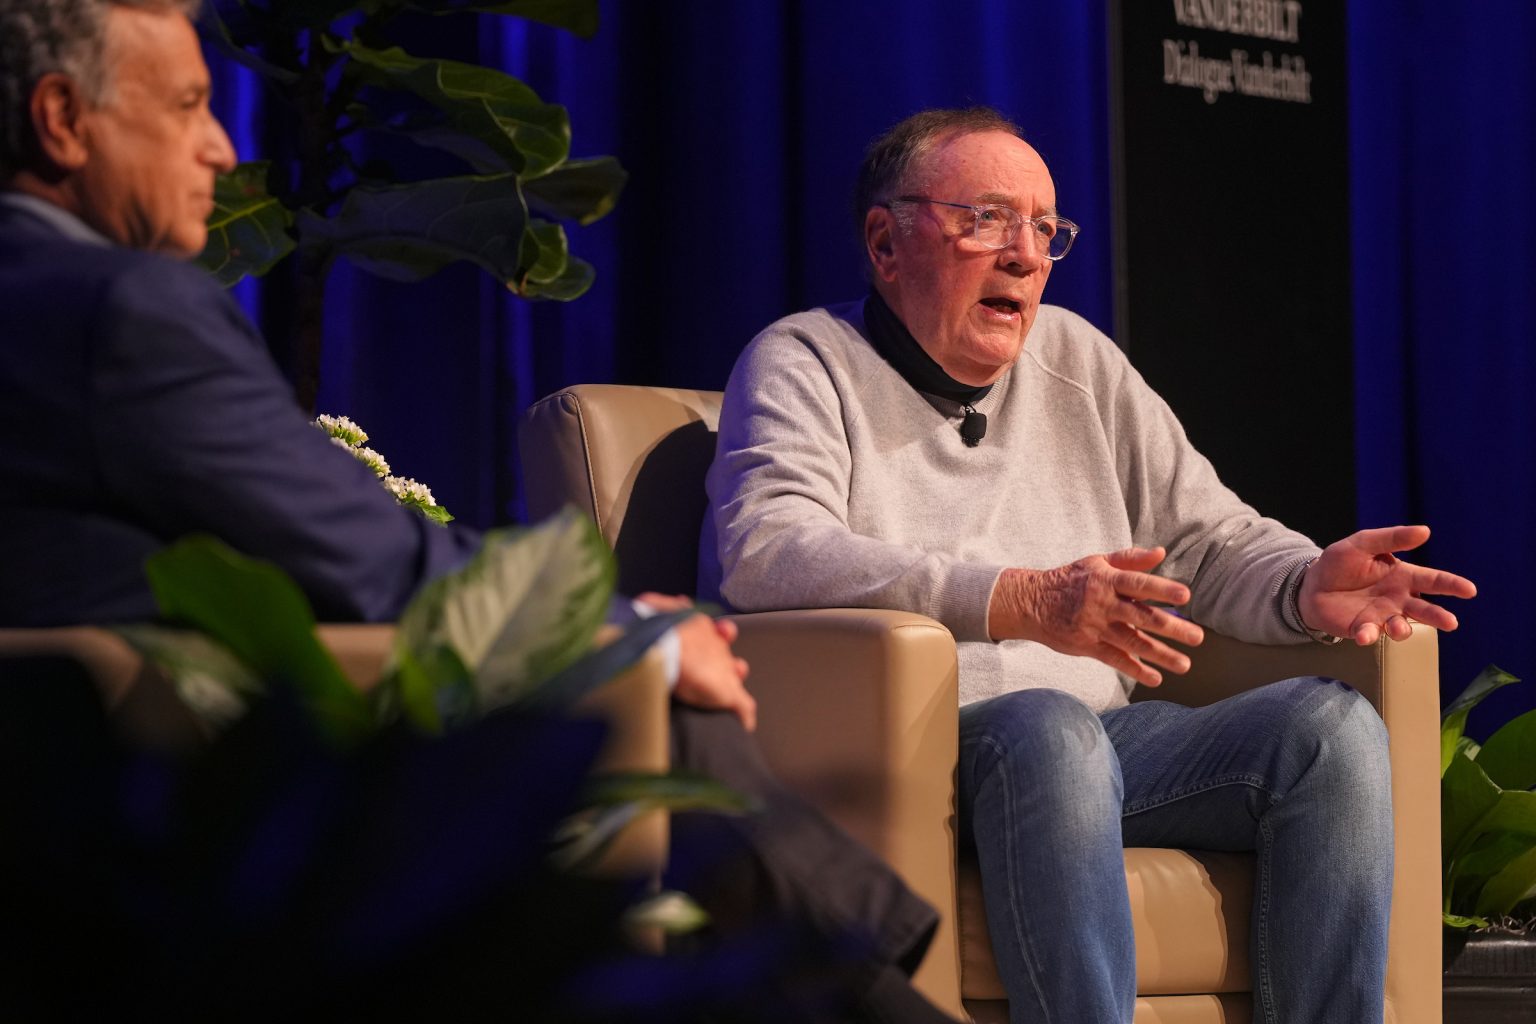 Bestselling author and Vanderbilt alumnus James Patterson (right) discussed his writing process and prolific career during a conversation moderated by John M. Seigenthaler in Langford Auditorium on April 11.